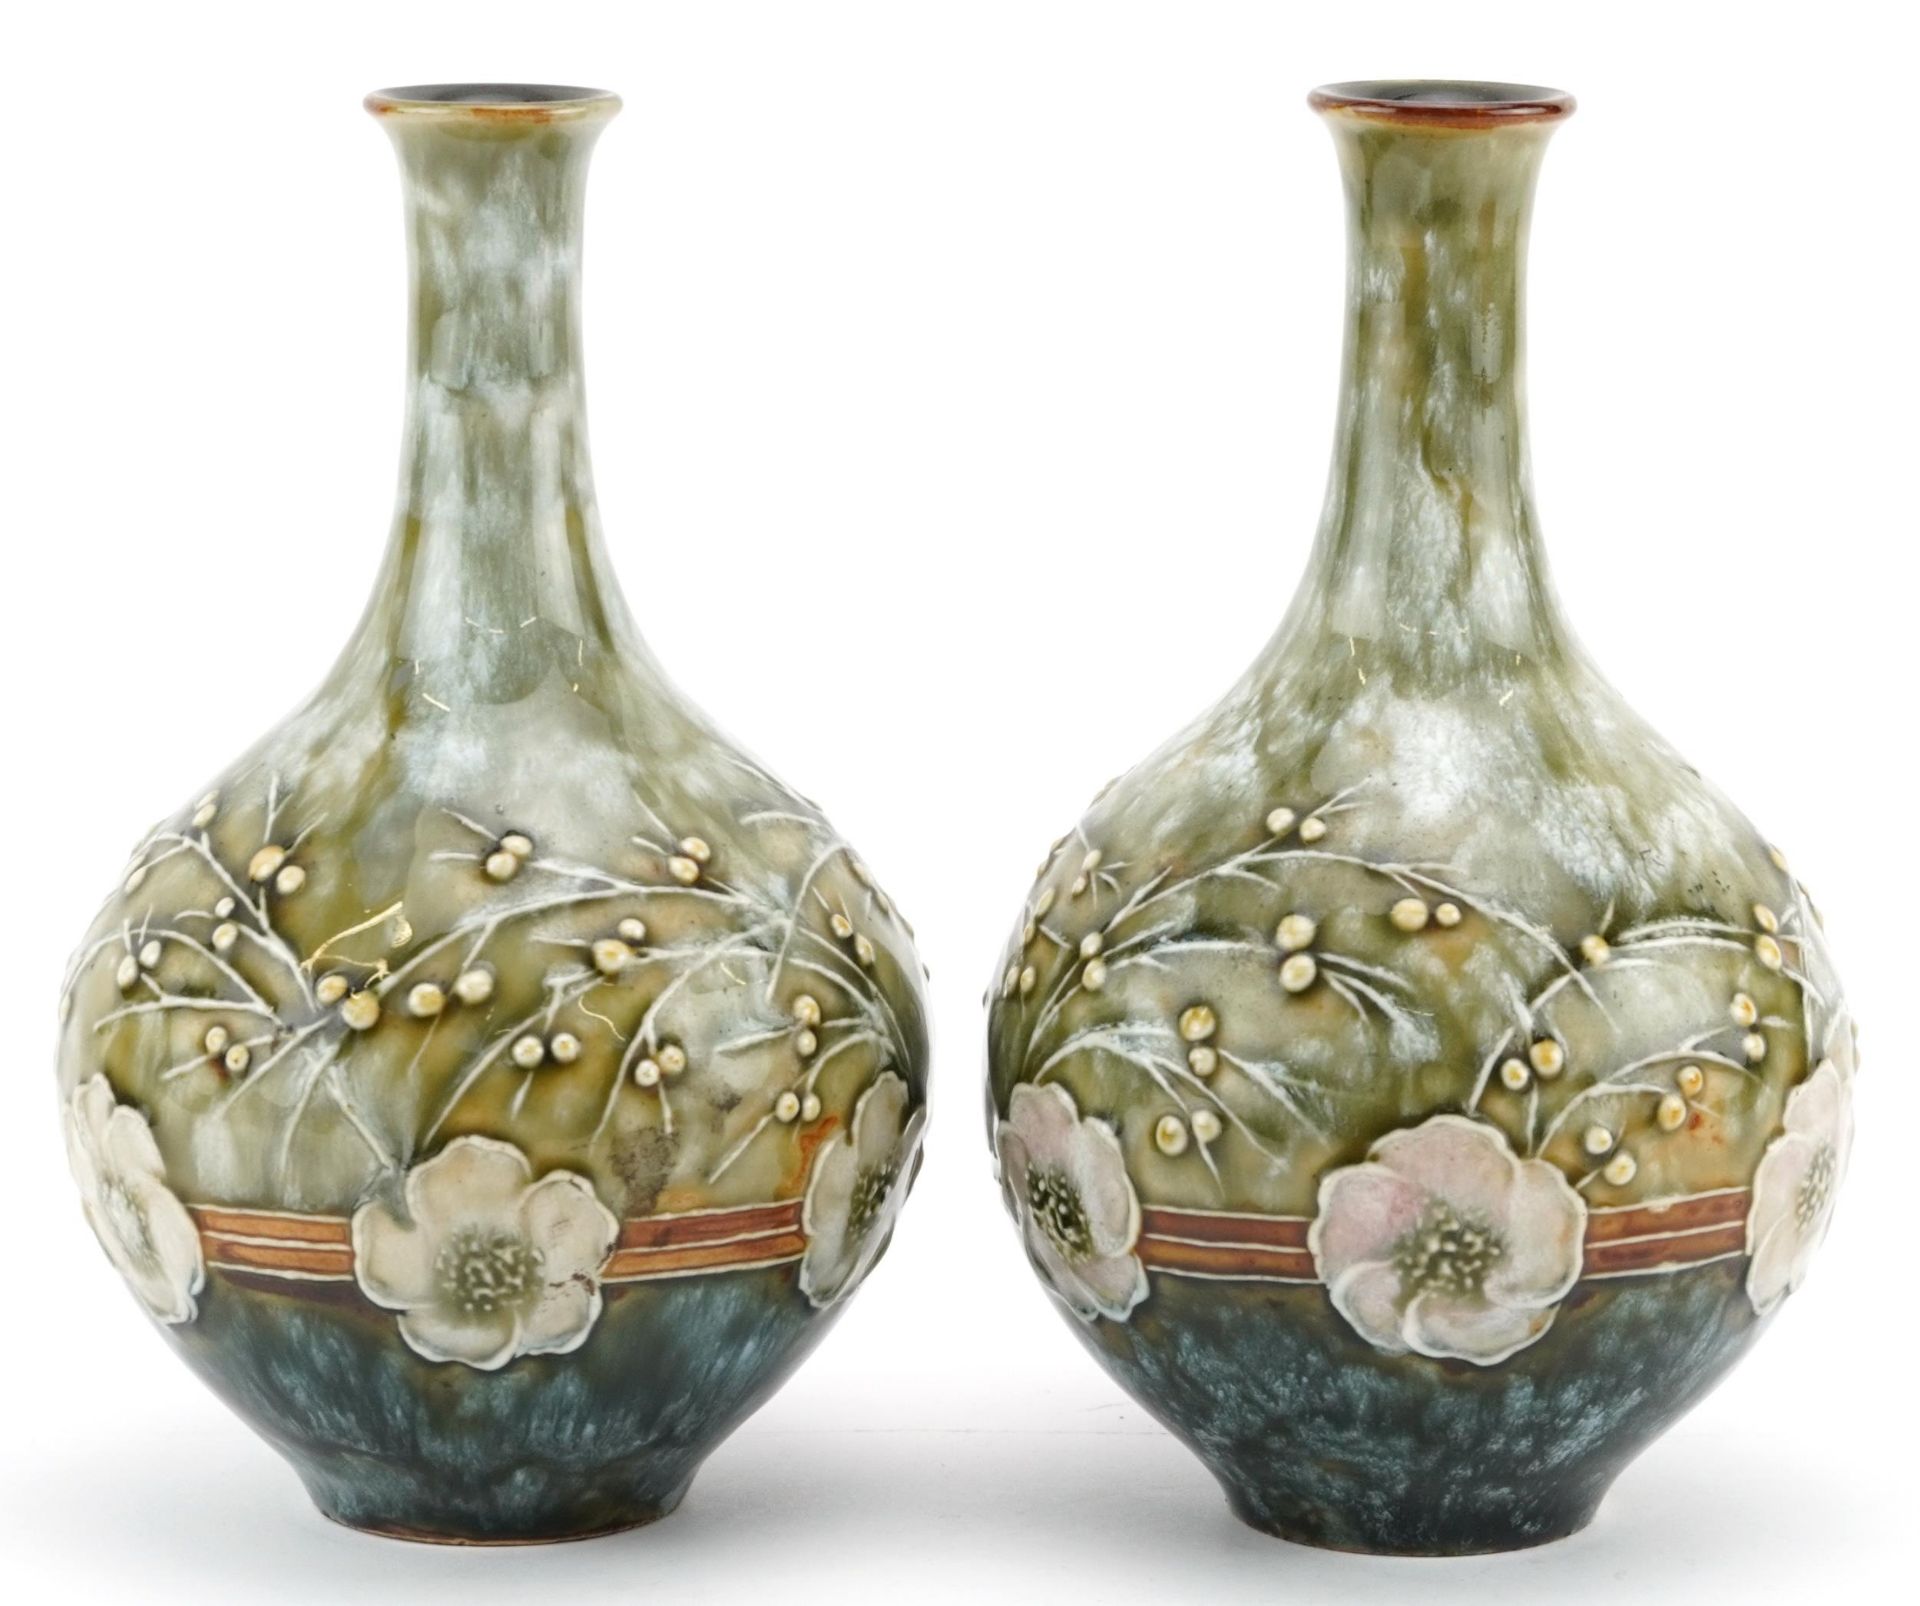 Eliza Simmance for Royal Doulton, pair of Art Nouveau stoneware vases hand painted with flowers,